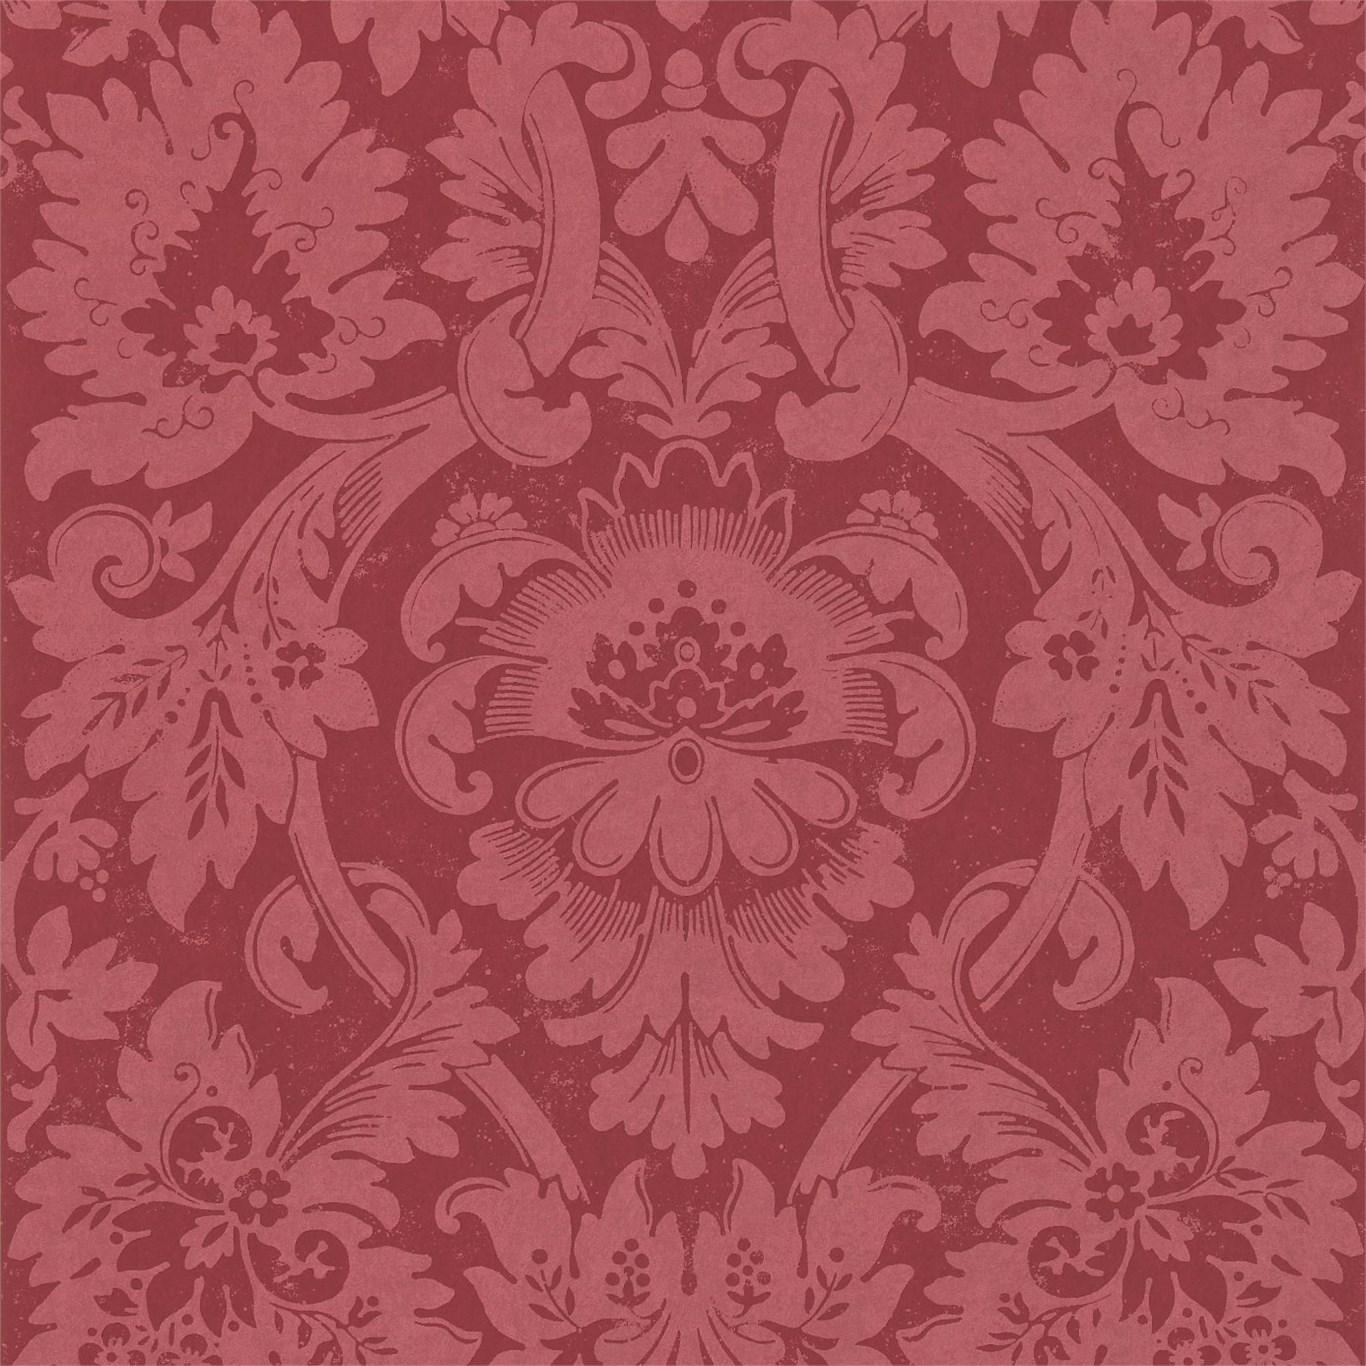 Luxury Fabric And Wallpaper Design Products British Uk